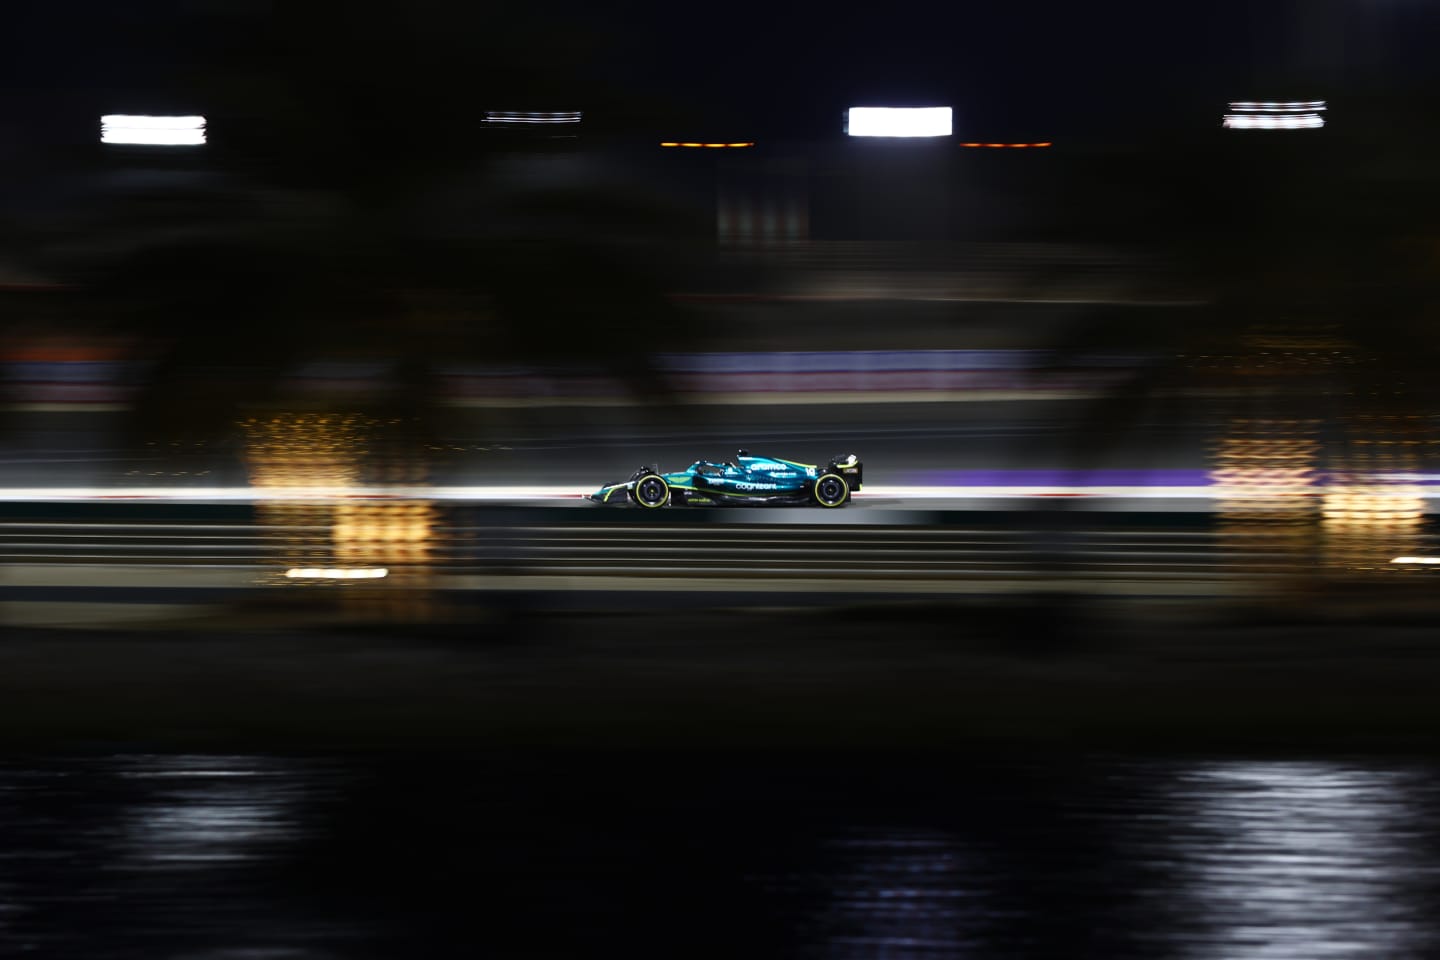 BAHRAIN, BAHRAIN - MARCH 18: Lance Stroll of Canada driving the (18) Aston Martin AMR22 Mercedes on track during practice ahead of the F1 Grand Prix of Bahrain at Bahrain International Circuit on March 18, 2022 in Bahrain, Bahrain. (Photo by Dan Istitene - Formula 1/Formula 1 via Getty Images)